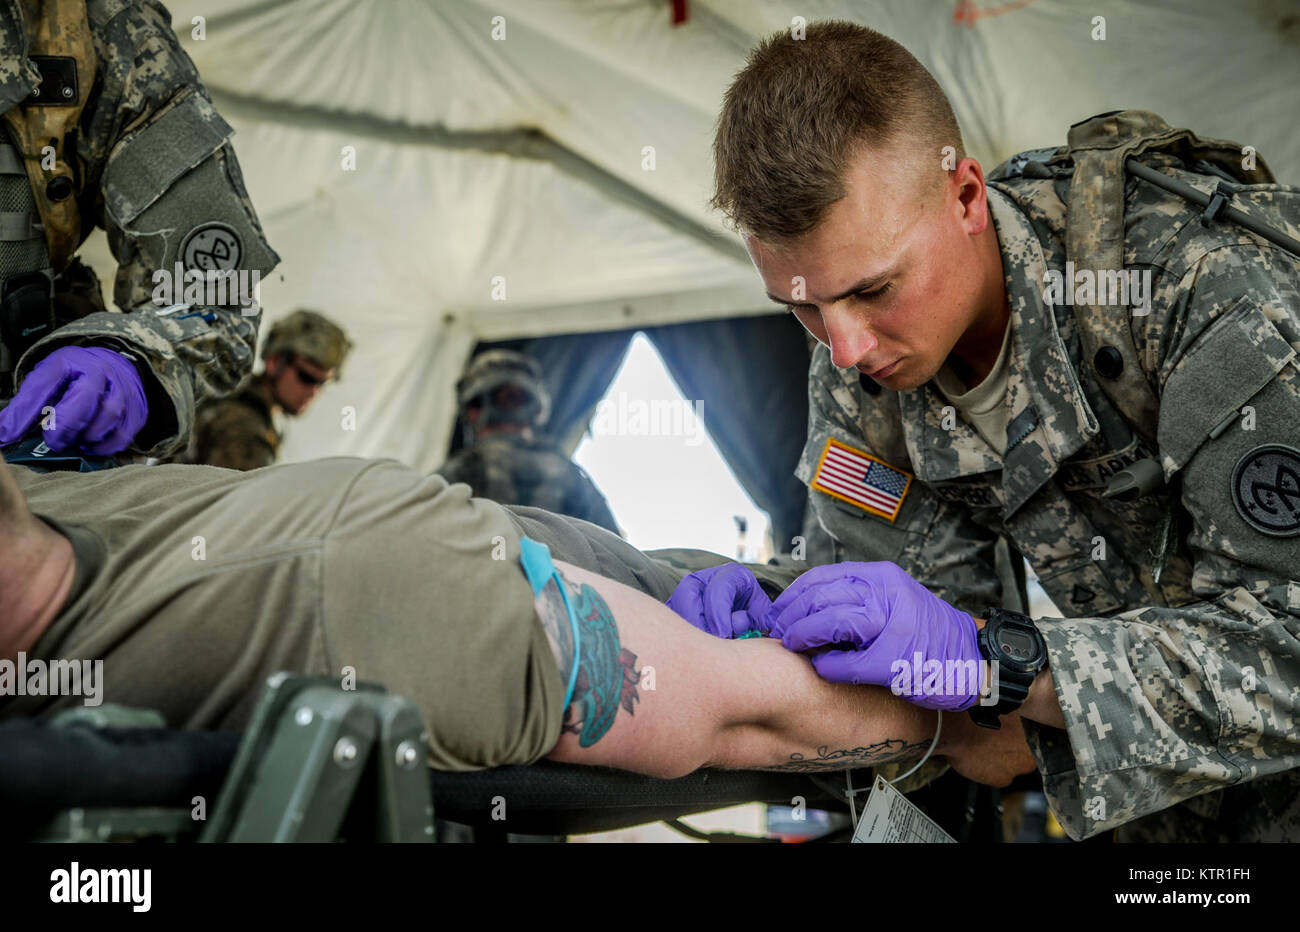 New York Army National Guard Pfc. Beau Fisher, assigned to Headquarters Co., 1st Battalion, 69th Infantry, administers IV fluids to a Soldier during a mass casualty exercise at the Army’s Joint Readiness Training Center, Fort Polk, La., Saturday, July 16, 2016. More than 3,000 New York Army National Guard Soldiers deployed for a three week exercise at the Army’s Joint Readiness Training Center, July 9-30, 2016. U.S. Army National Guard photo by Sgt. Harley Jelis. Stock Photo